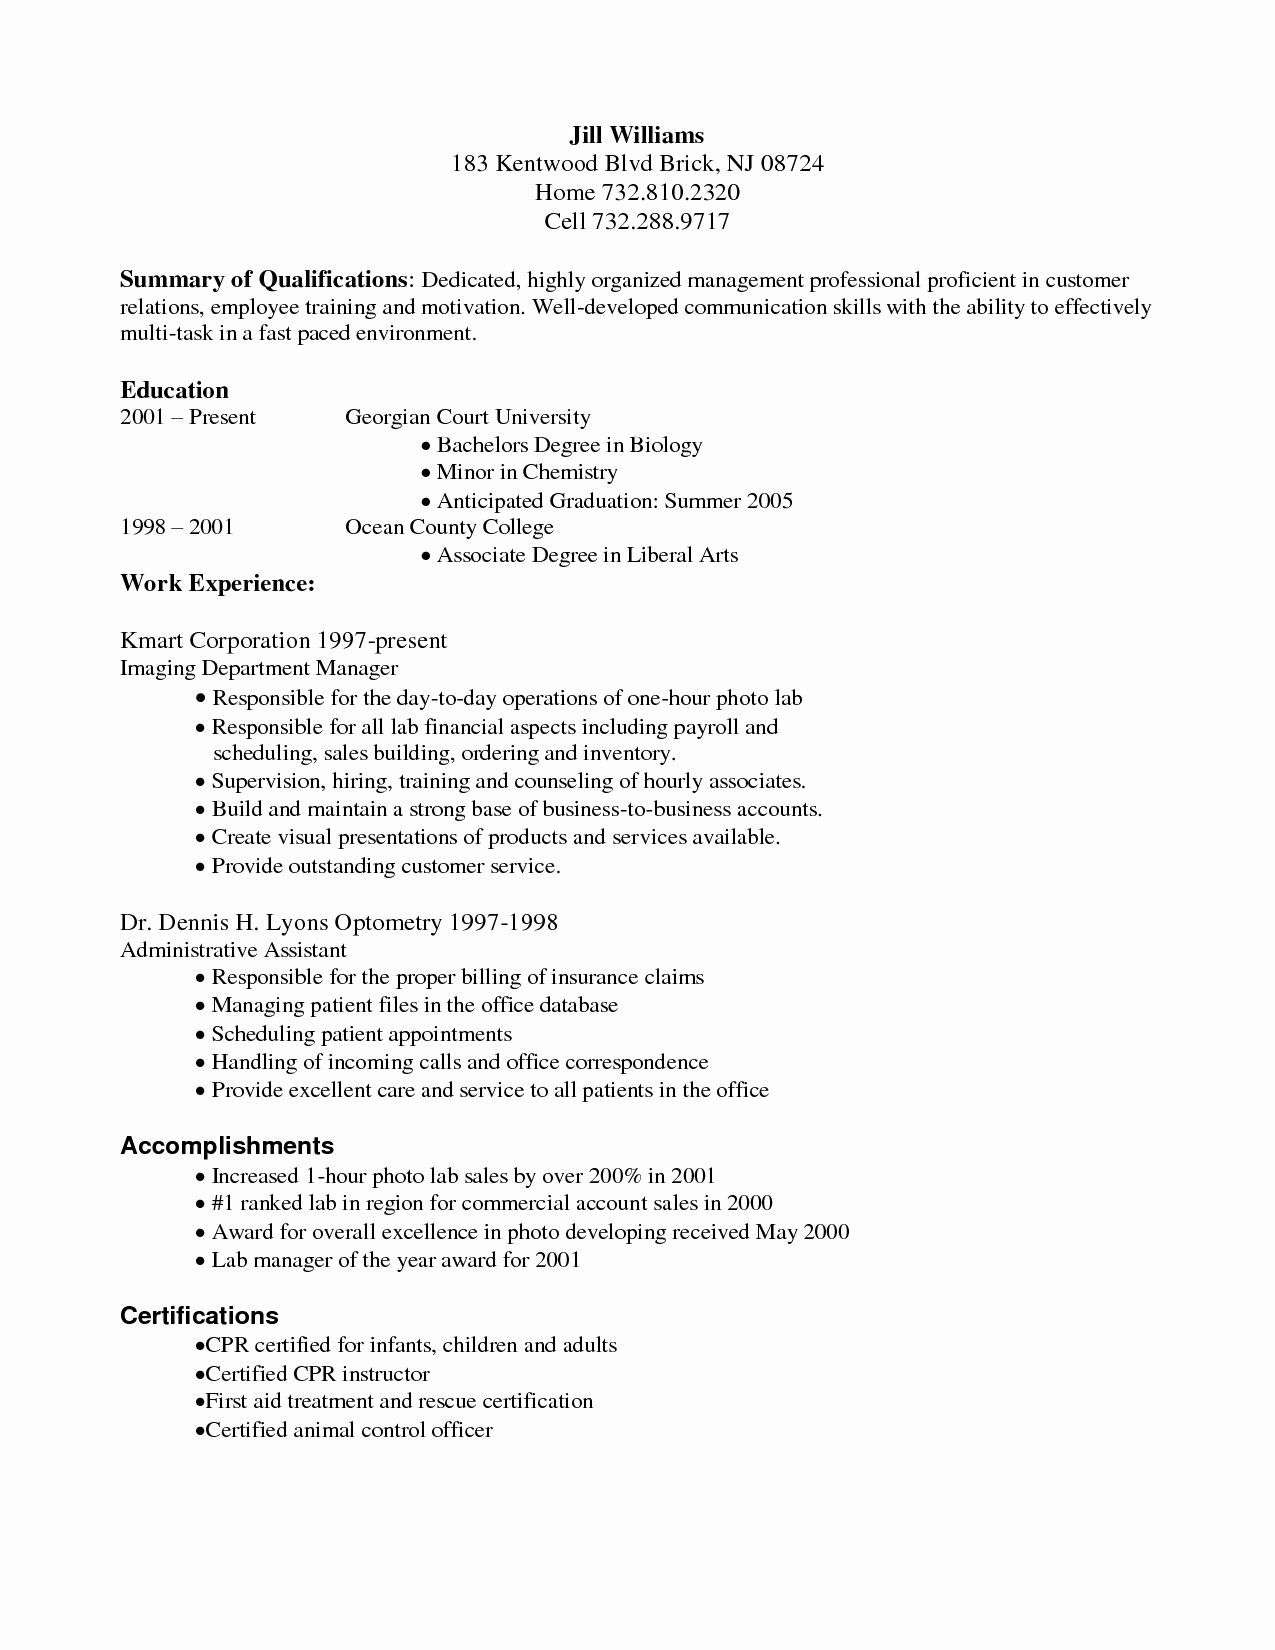 Medical Biller Resume Examples Awesome Medical Billing and Coding Resume Example